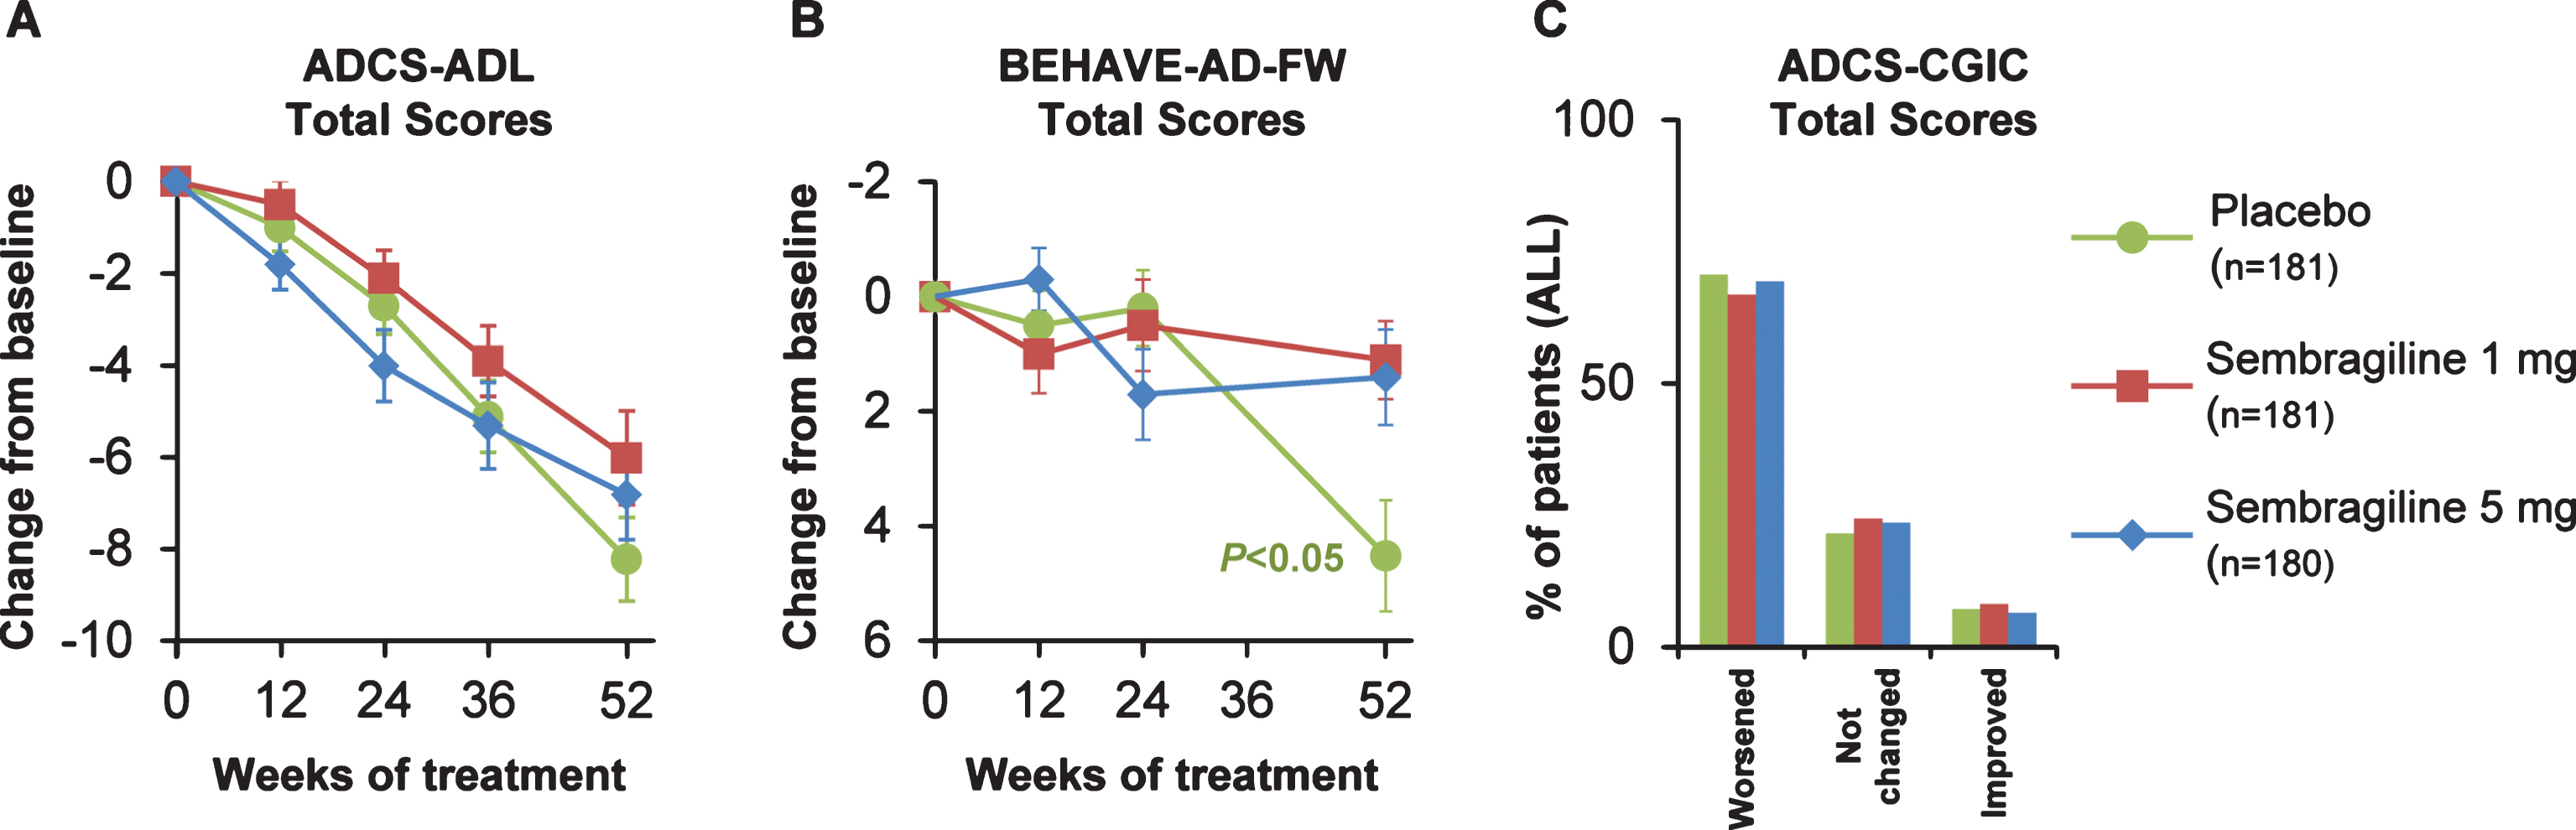 Change from baseline in (A) ADCS-ADL, (B) BEHAVE-AD-FW, and (C) ADCS-CGIC (secondary endpoint) by treatment group. Change from baseline to Week 52 in mean scores in total study population. Error bars represent SEM. ADCS-ADL, Alzheimer’s Disease Cooperative Study-Activities of Daily Living; ADCS-CGIC, Alzheimer’s Disease Cooperative Study-Clinical Global Impression of Change; BEHAVE-AD- FW, Behavioral Pathology in Alzheimer’s Disease Frequency-Weighted Severity Scale; SEM, standard error of the mean.